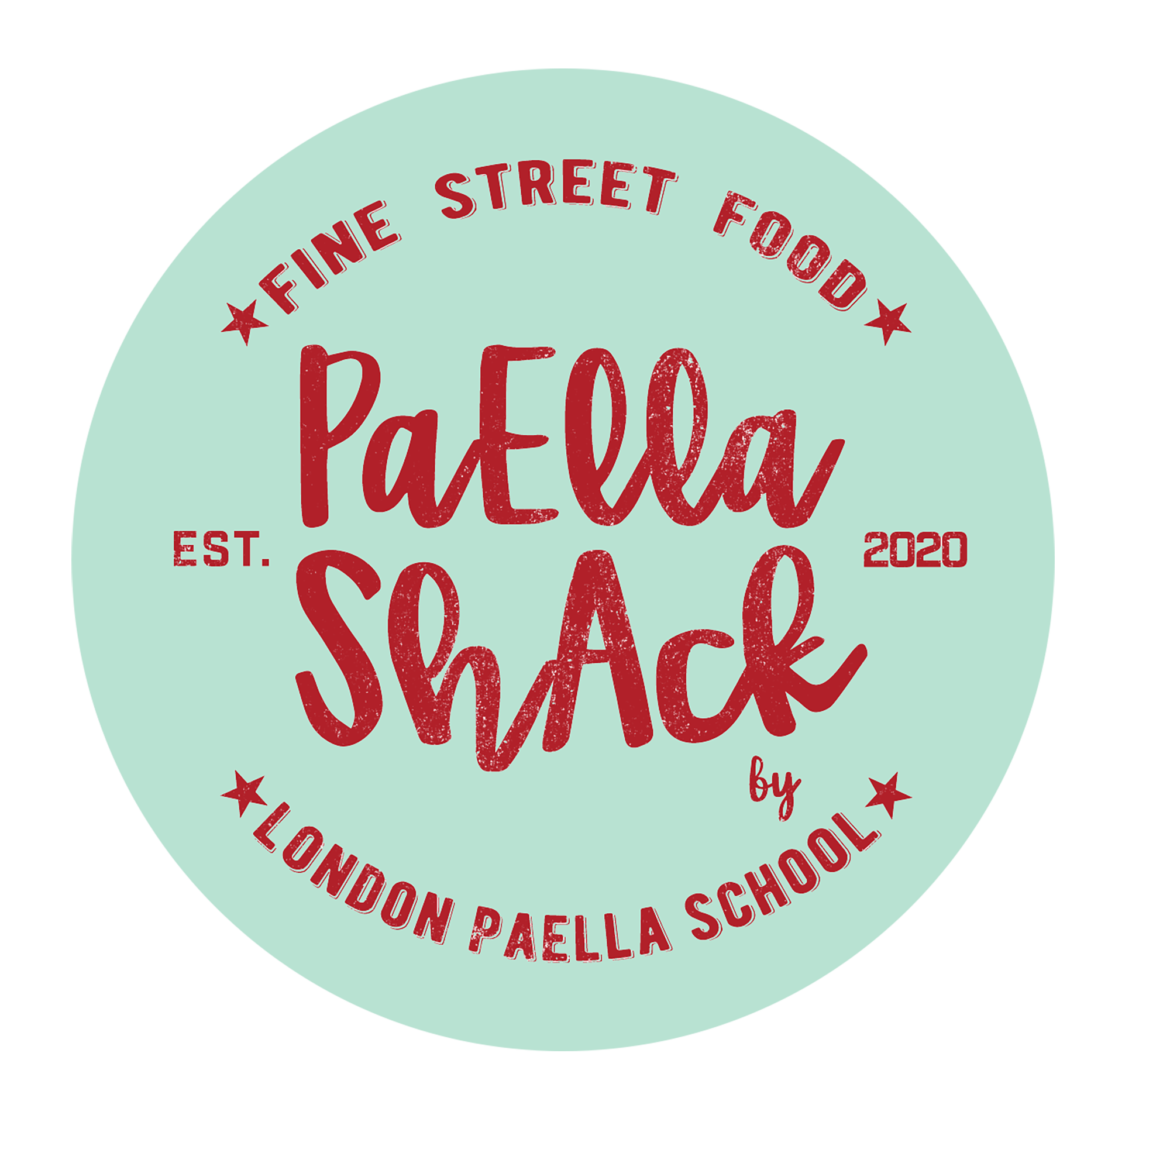 Paella Shack by London Paella School Launch its Food Delivery Business with Slerp